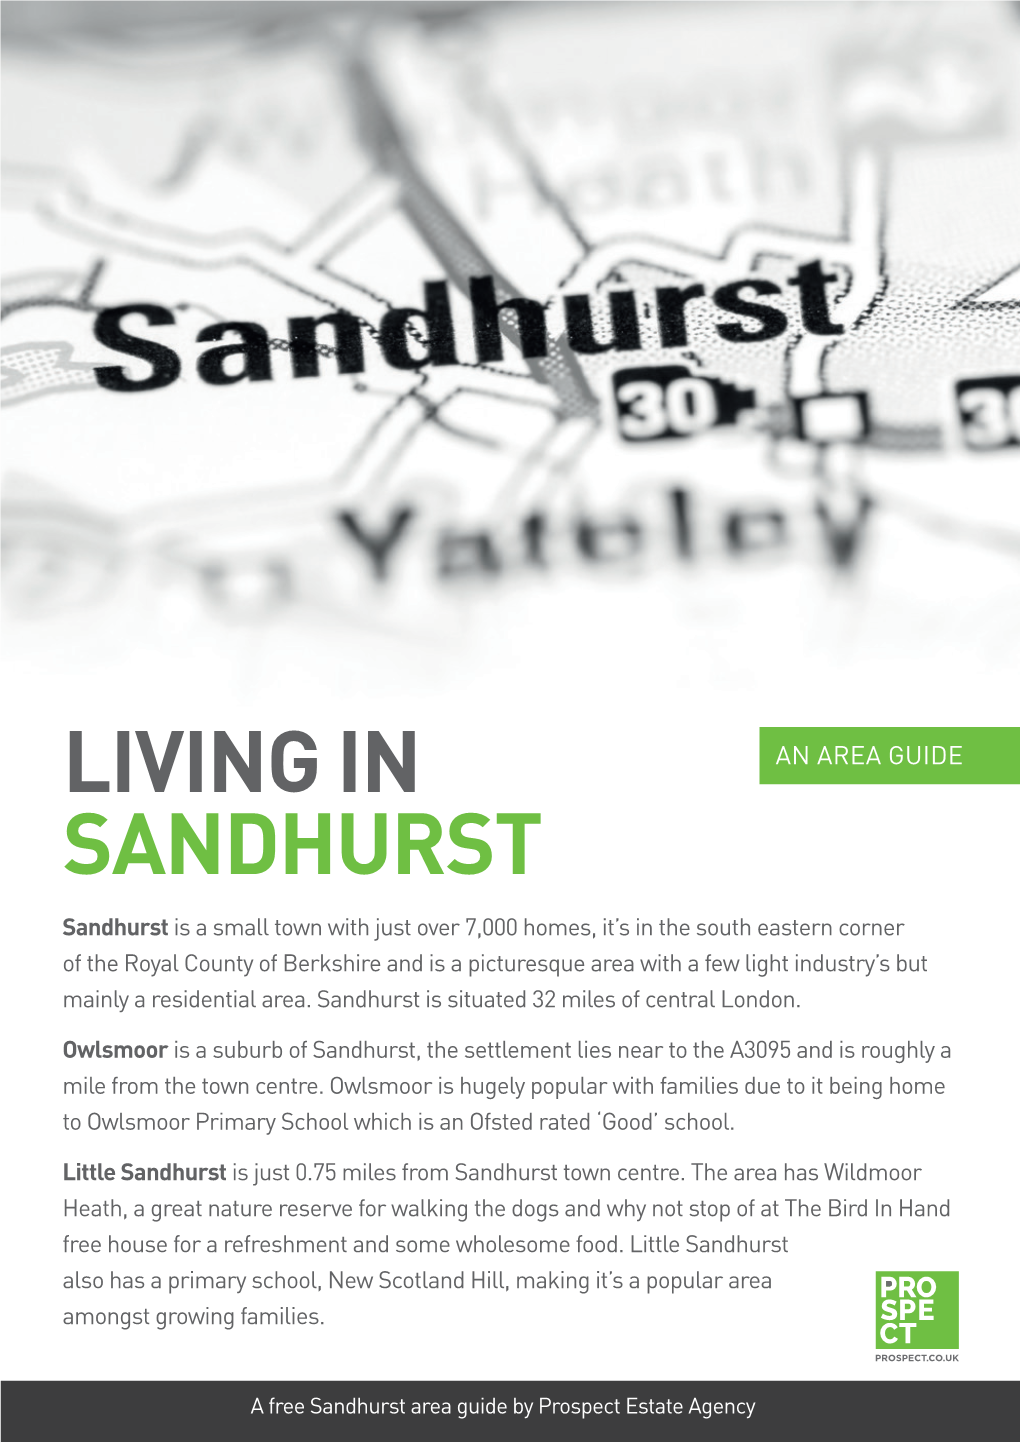 Sandhurst Area Guide by Prospect Estate Agency SCHOOLS Sandhurst Offers a Plethora of Schools, Many of Which Hold Ofsted’S ‘Outstanding’ Status